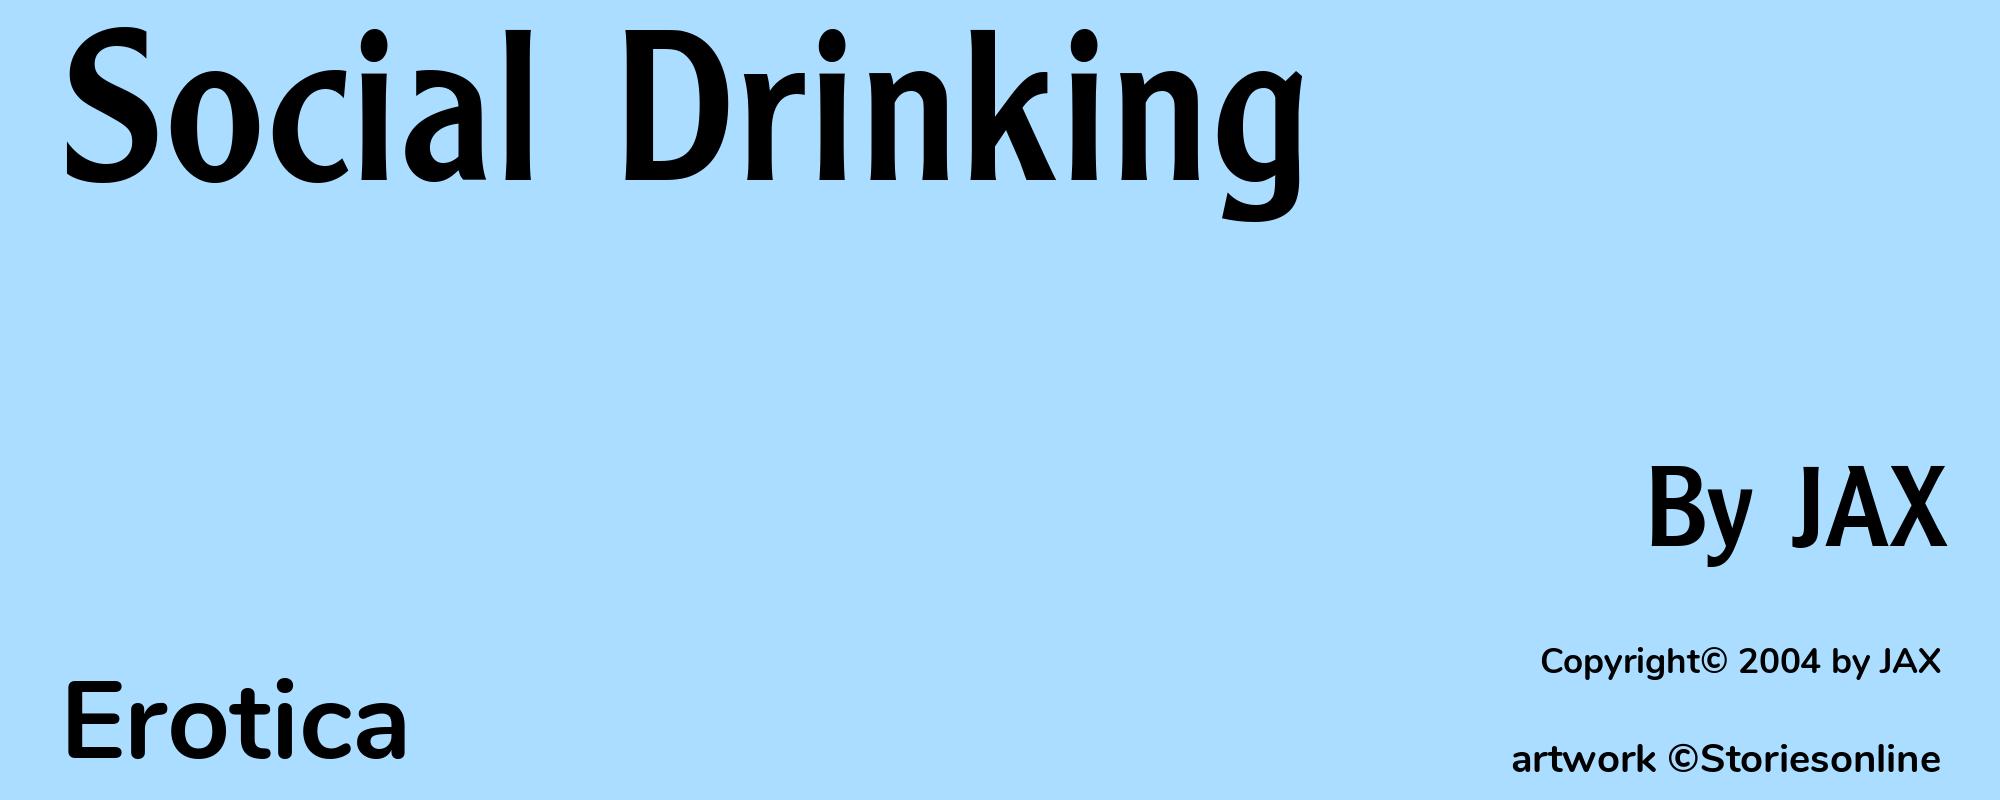 Social Drinking - Cover